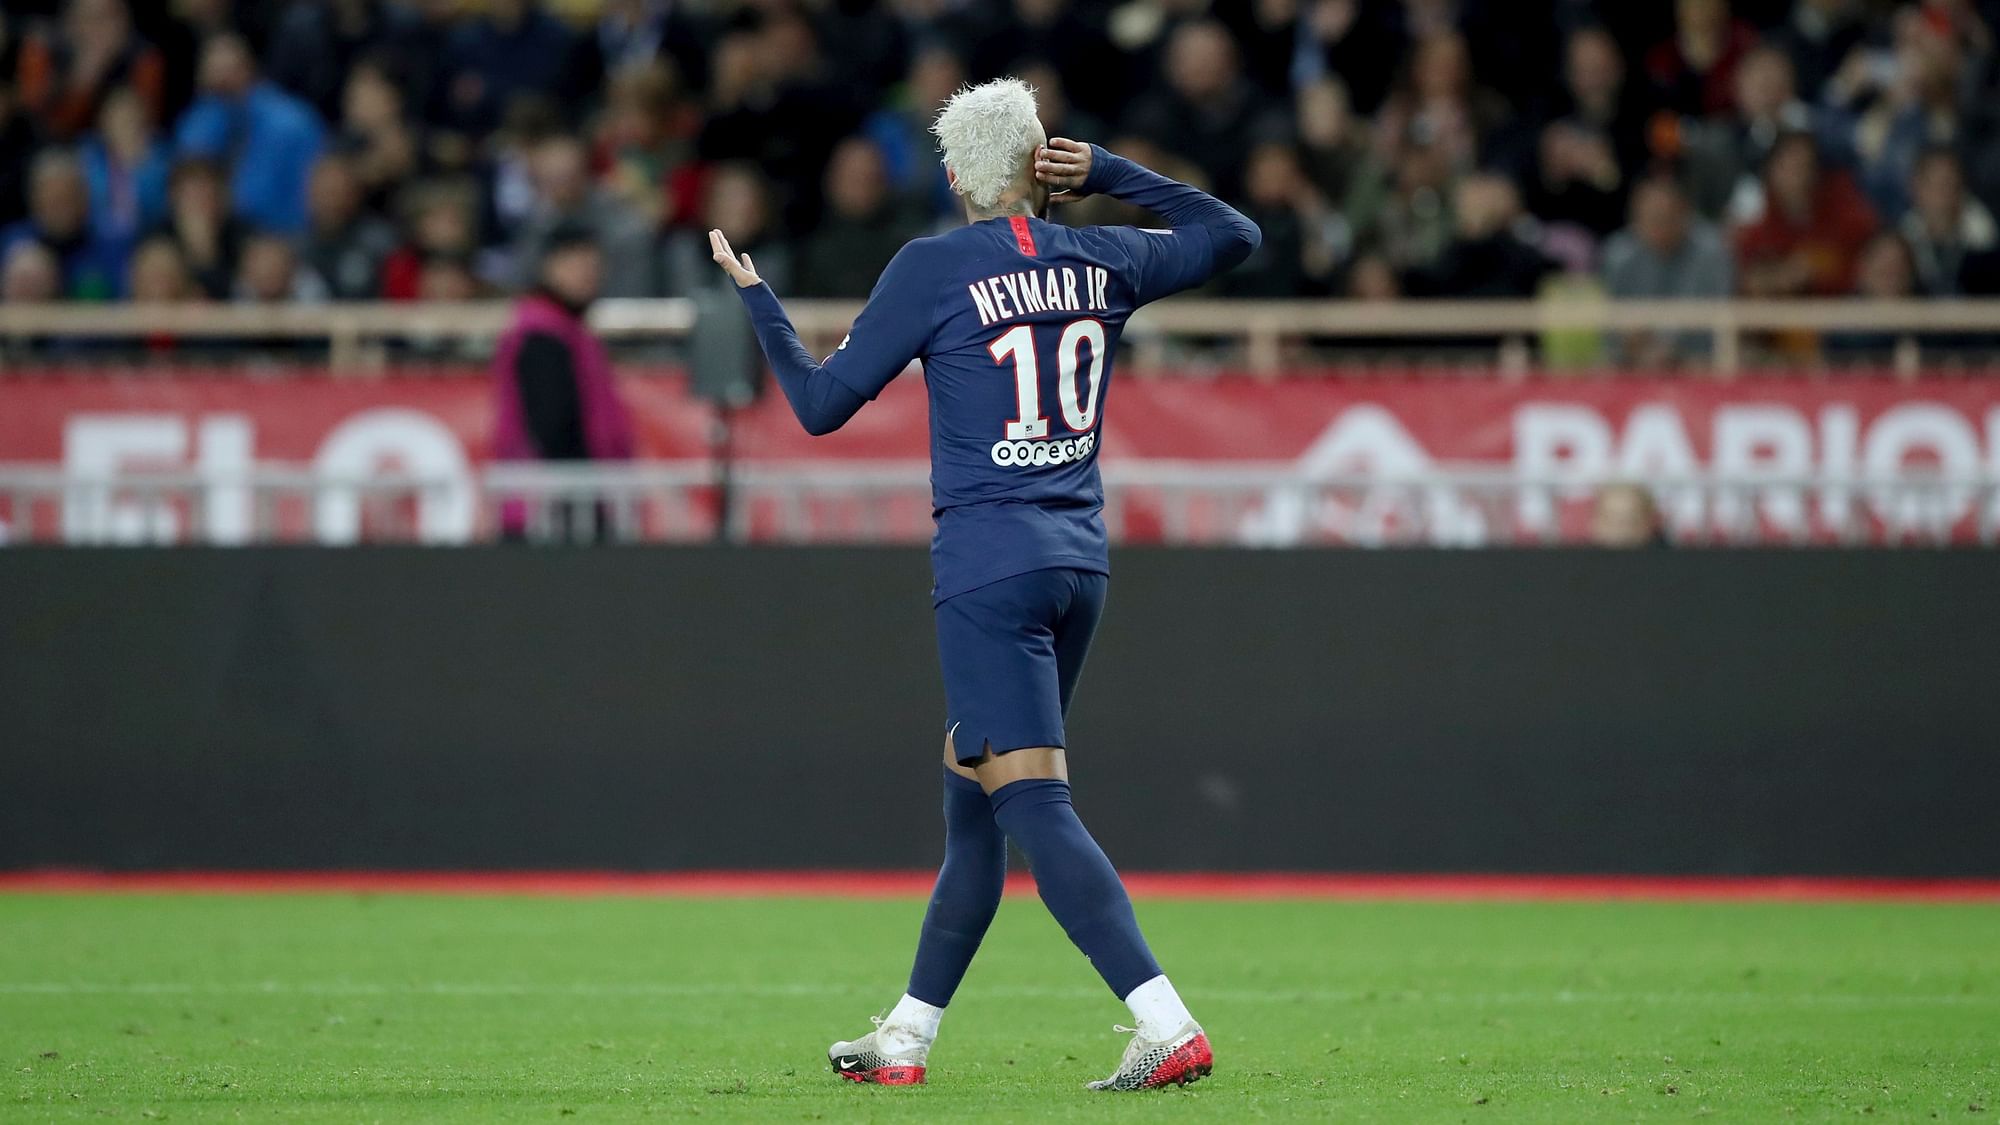 Neymar was involved in all three goals as Paris Saint-Germain cruised past Reims 3-0 on Wednesday, 22 January to set up a League Cup final against Lyon.